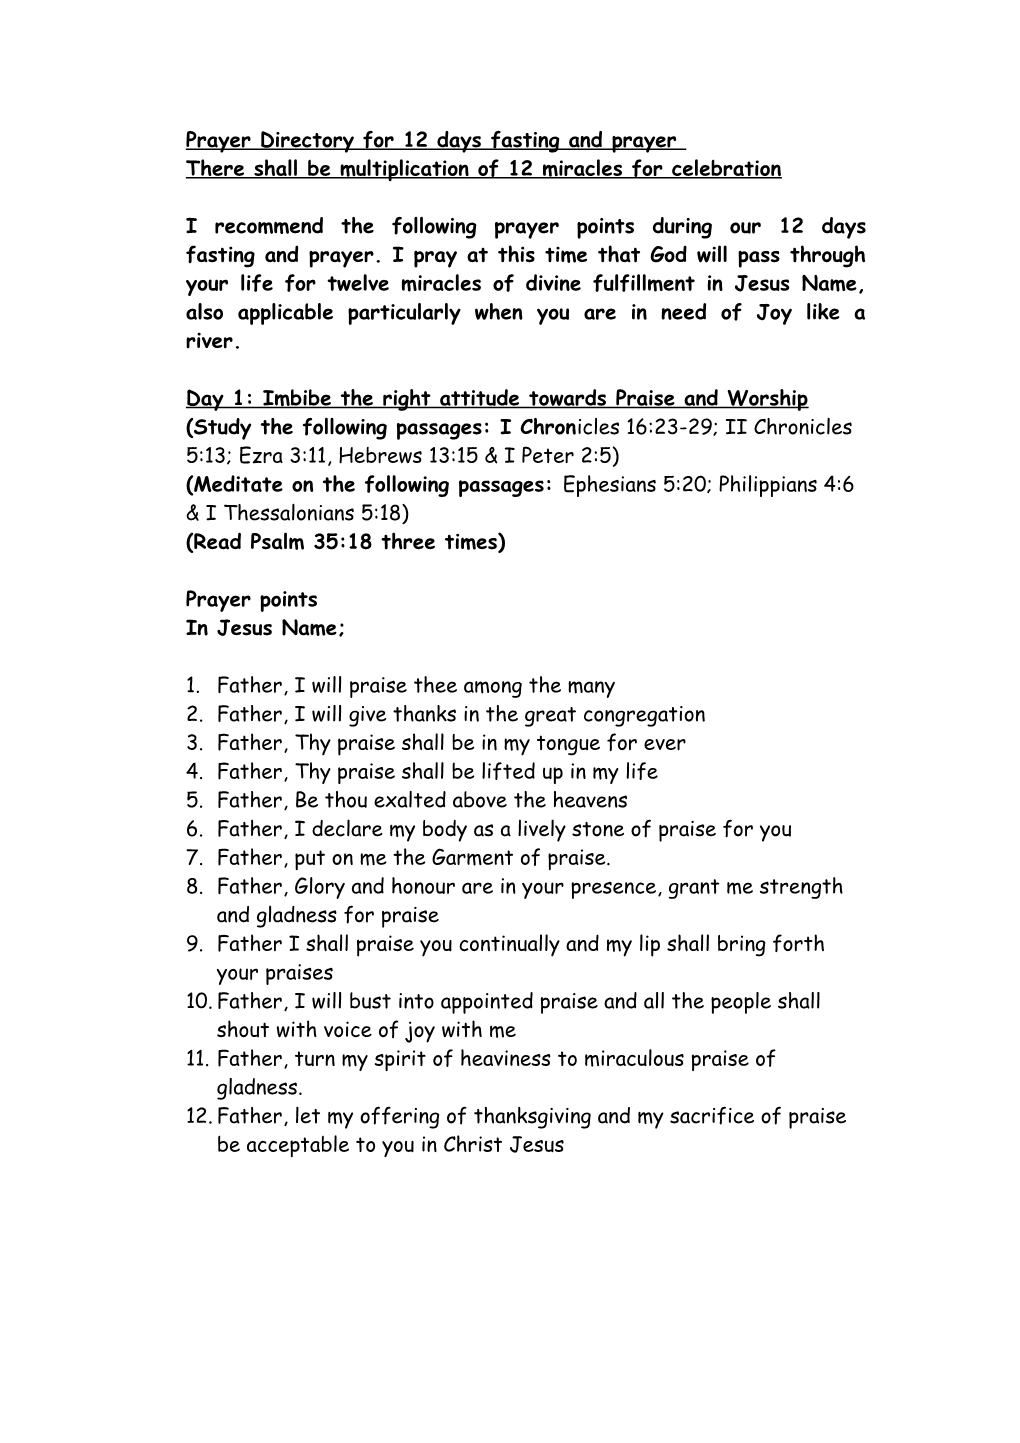 Prayer Directory for 12 Days Fasting and Prayer